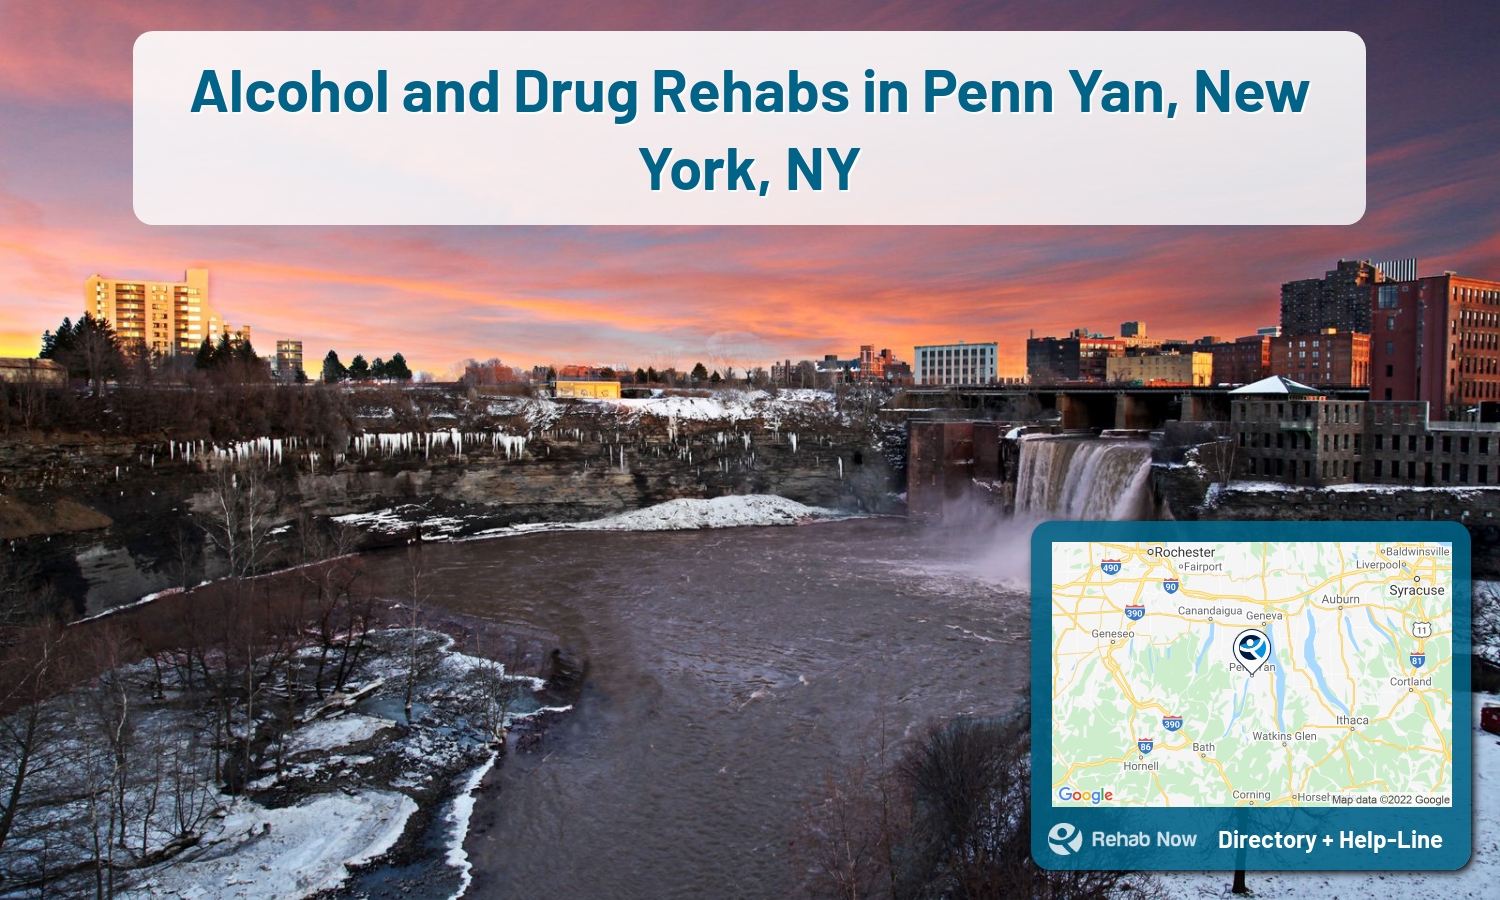 View options, availability, treatment methods, and more, for drug rehab and alcohol treatment in Penn Yan, New York